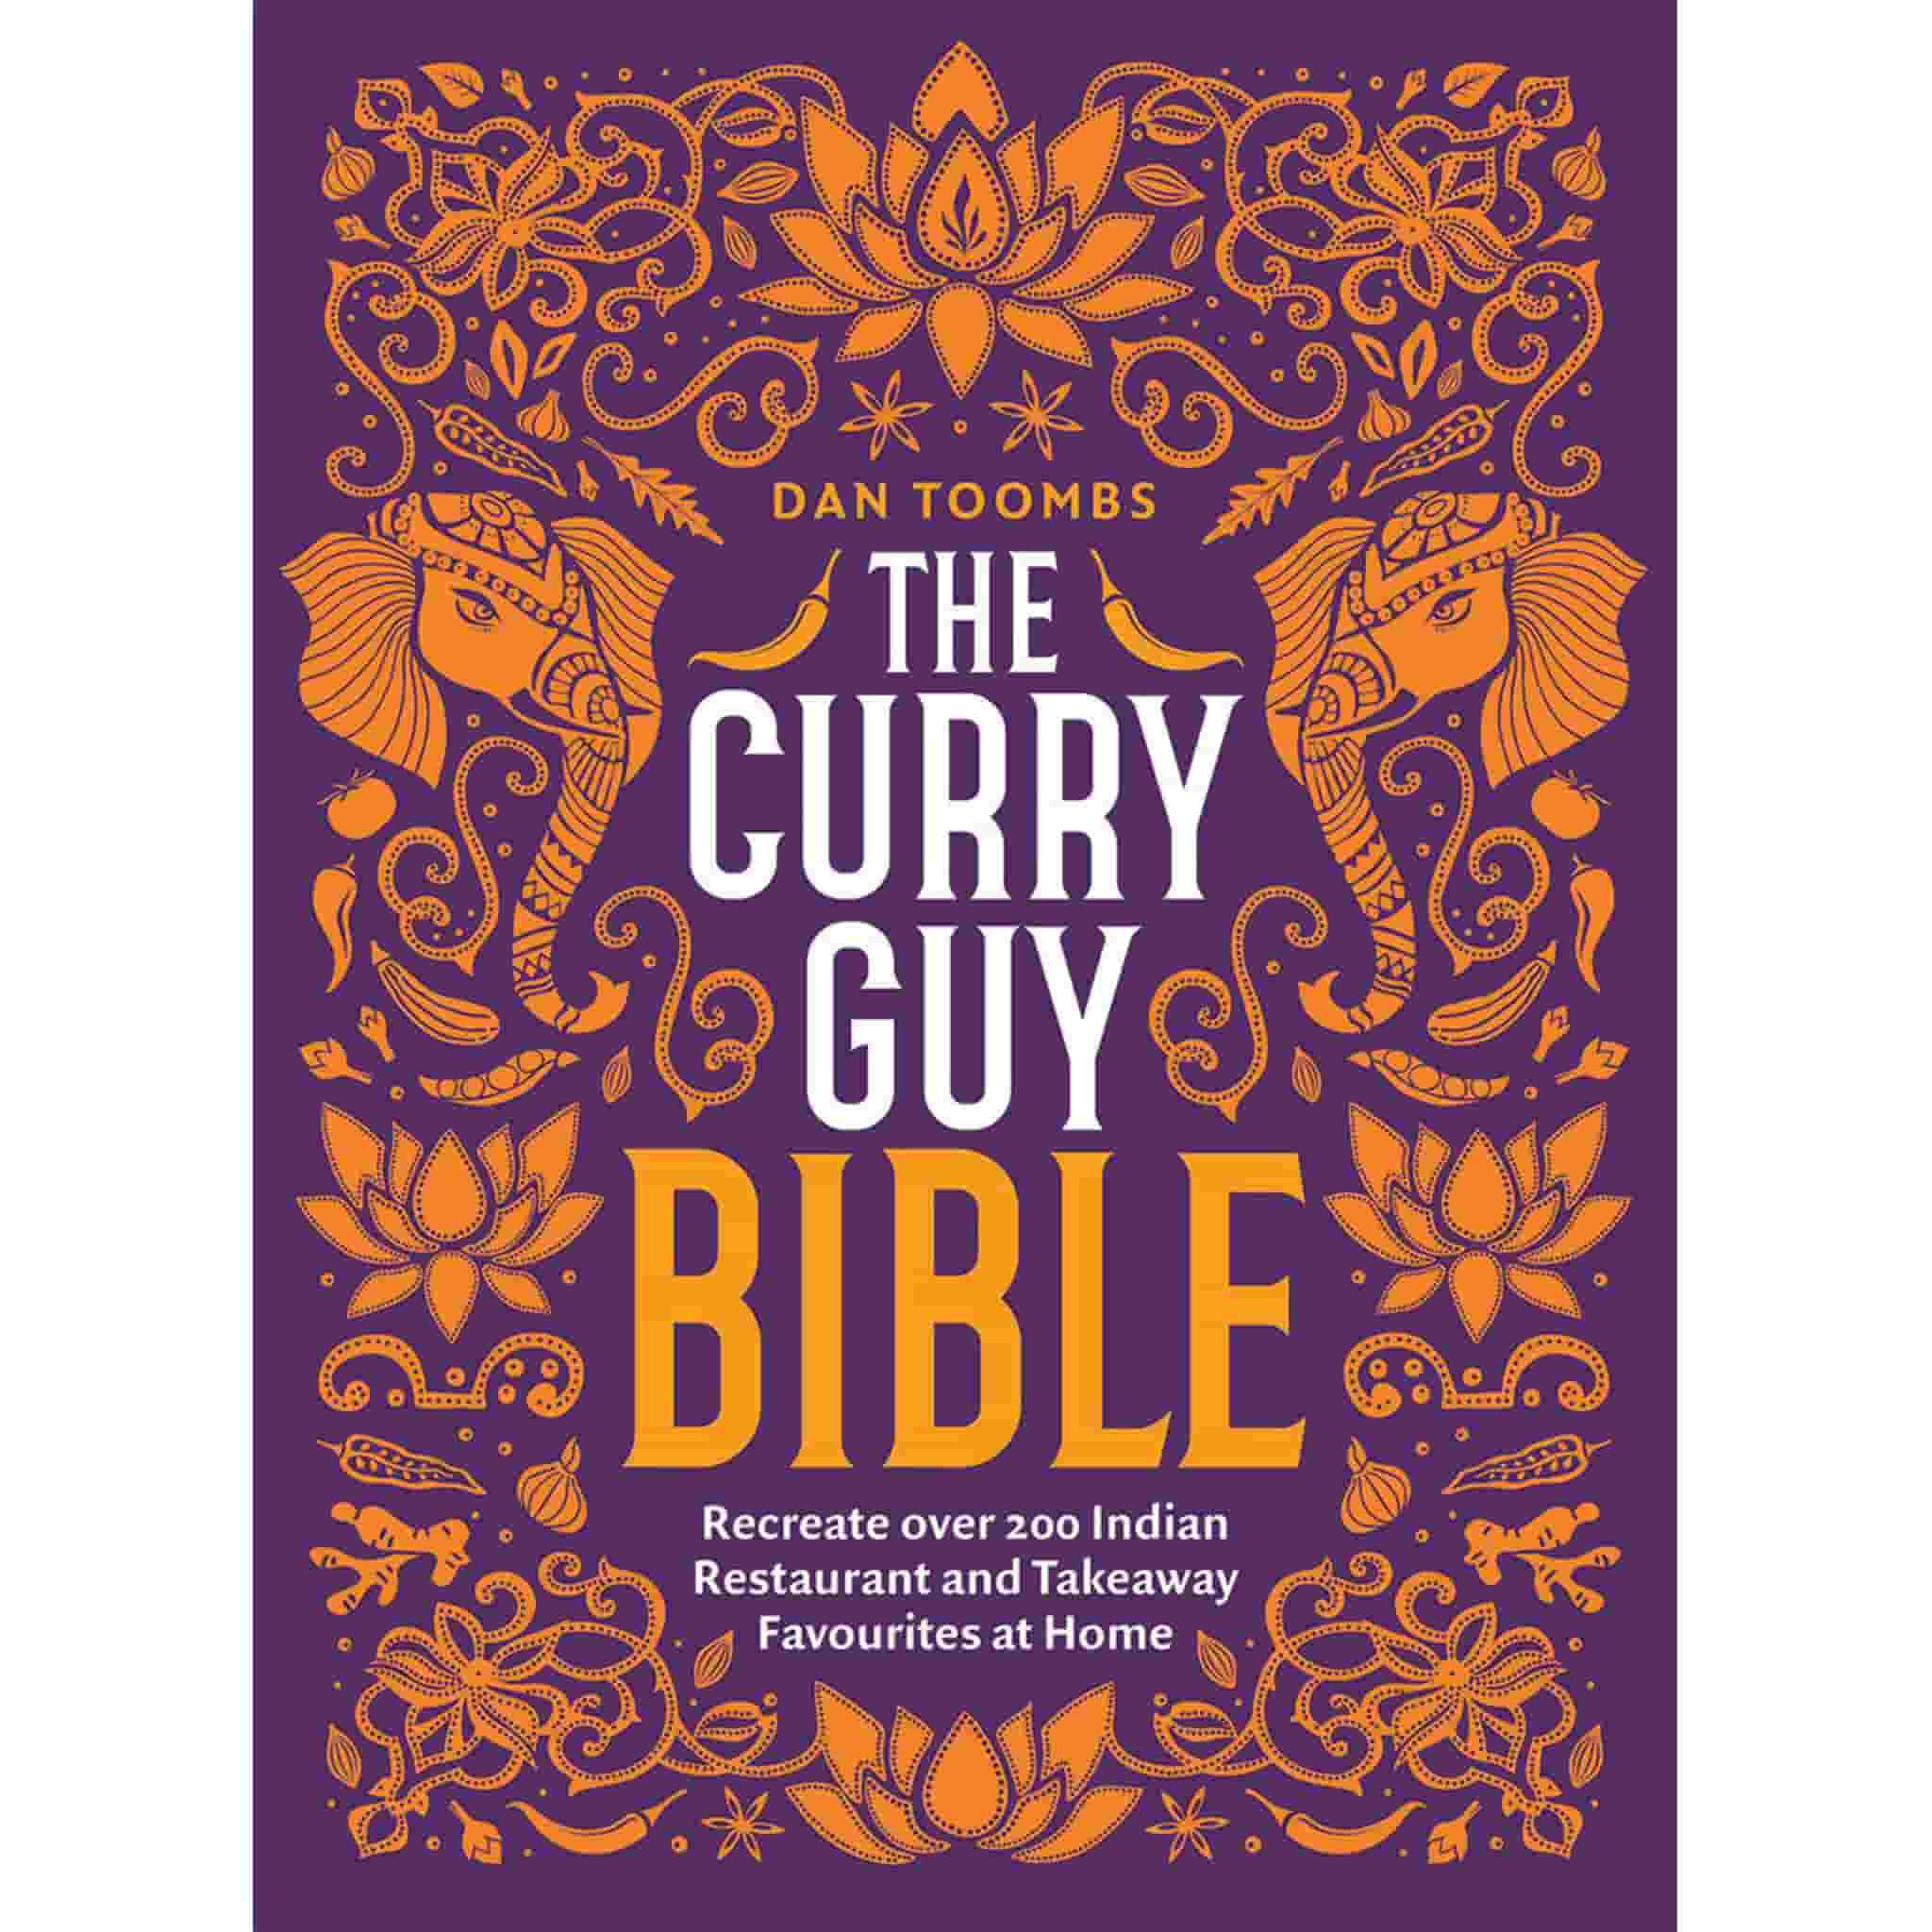 The Curry Guy Bible by Dan Tombs